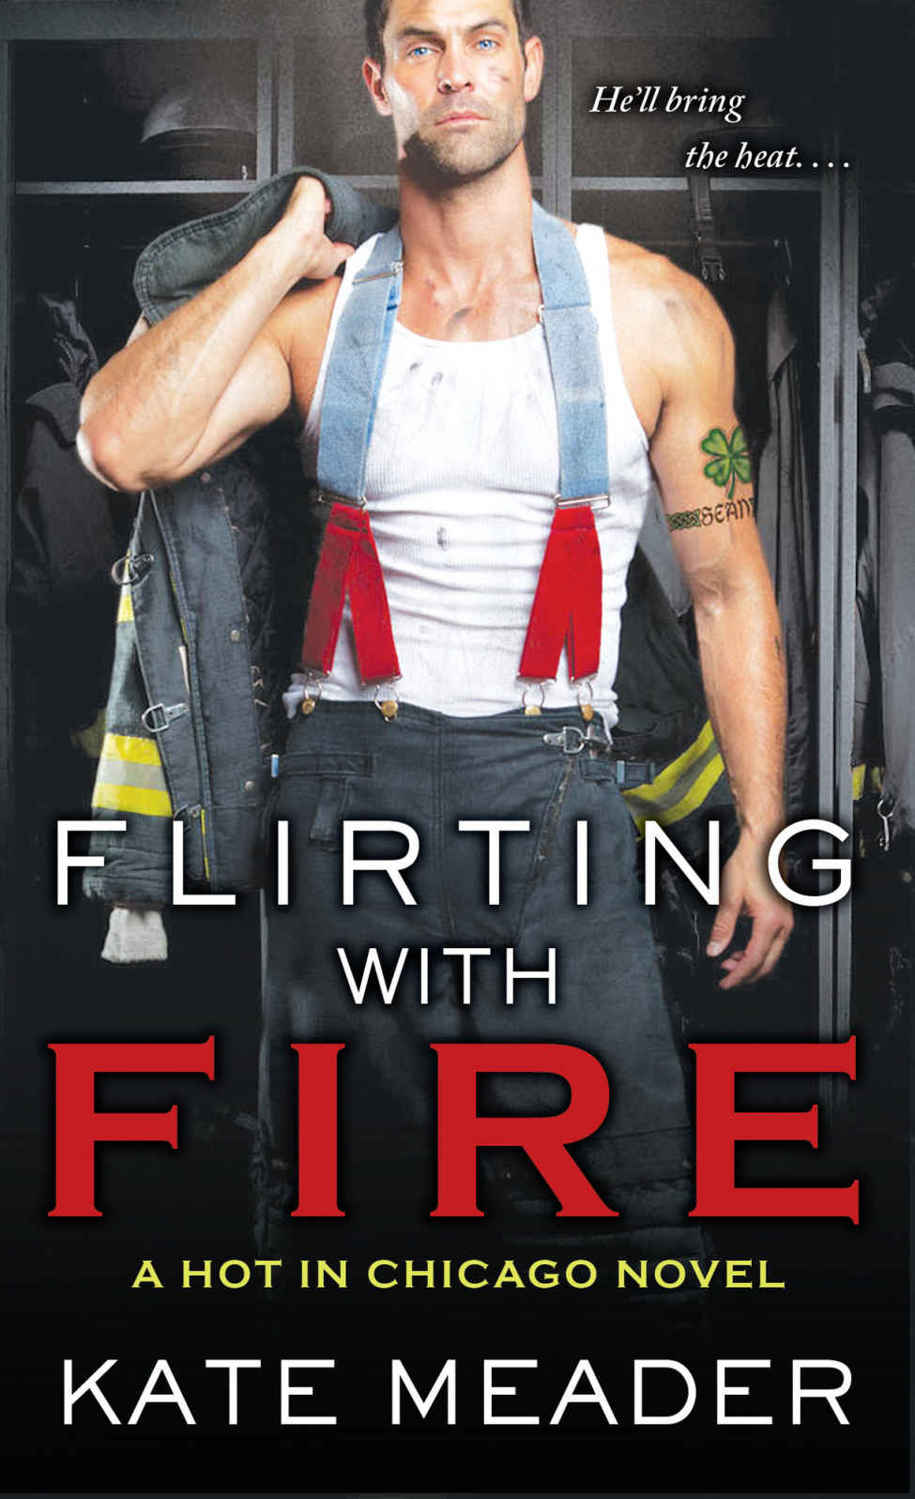 Flirting with Fire (Hot in Chicago #1) by Kate Meader